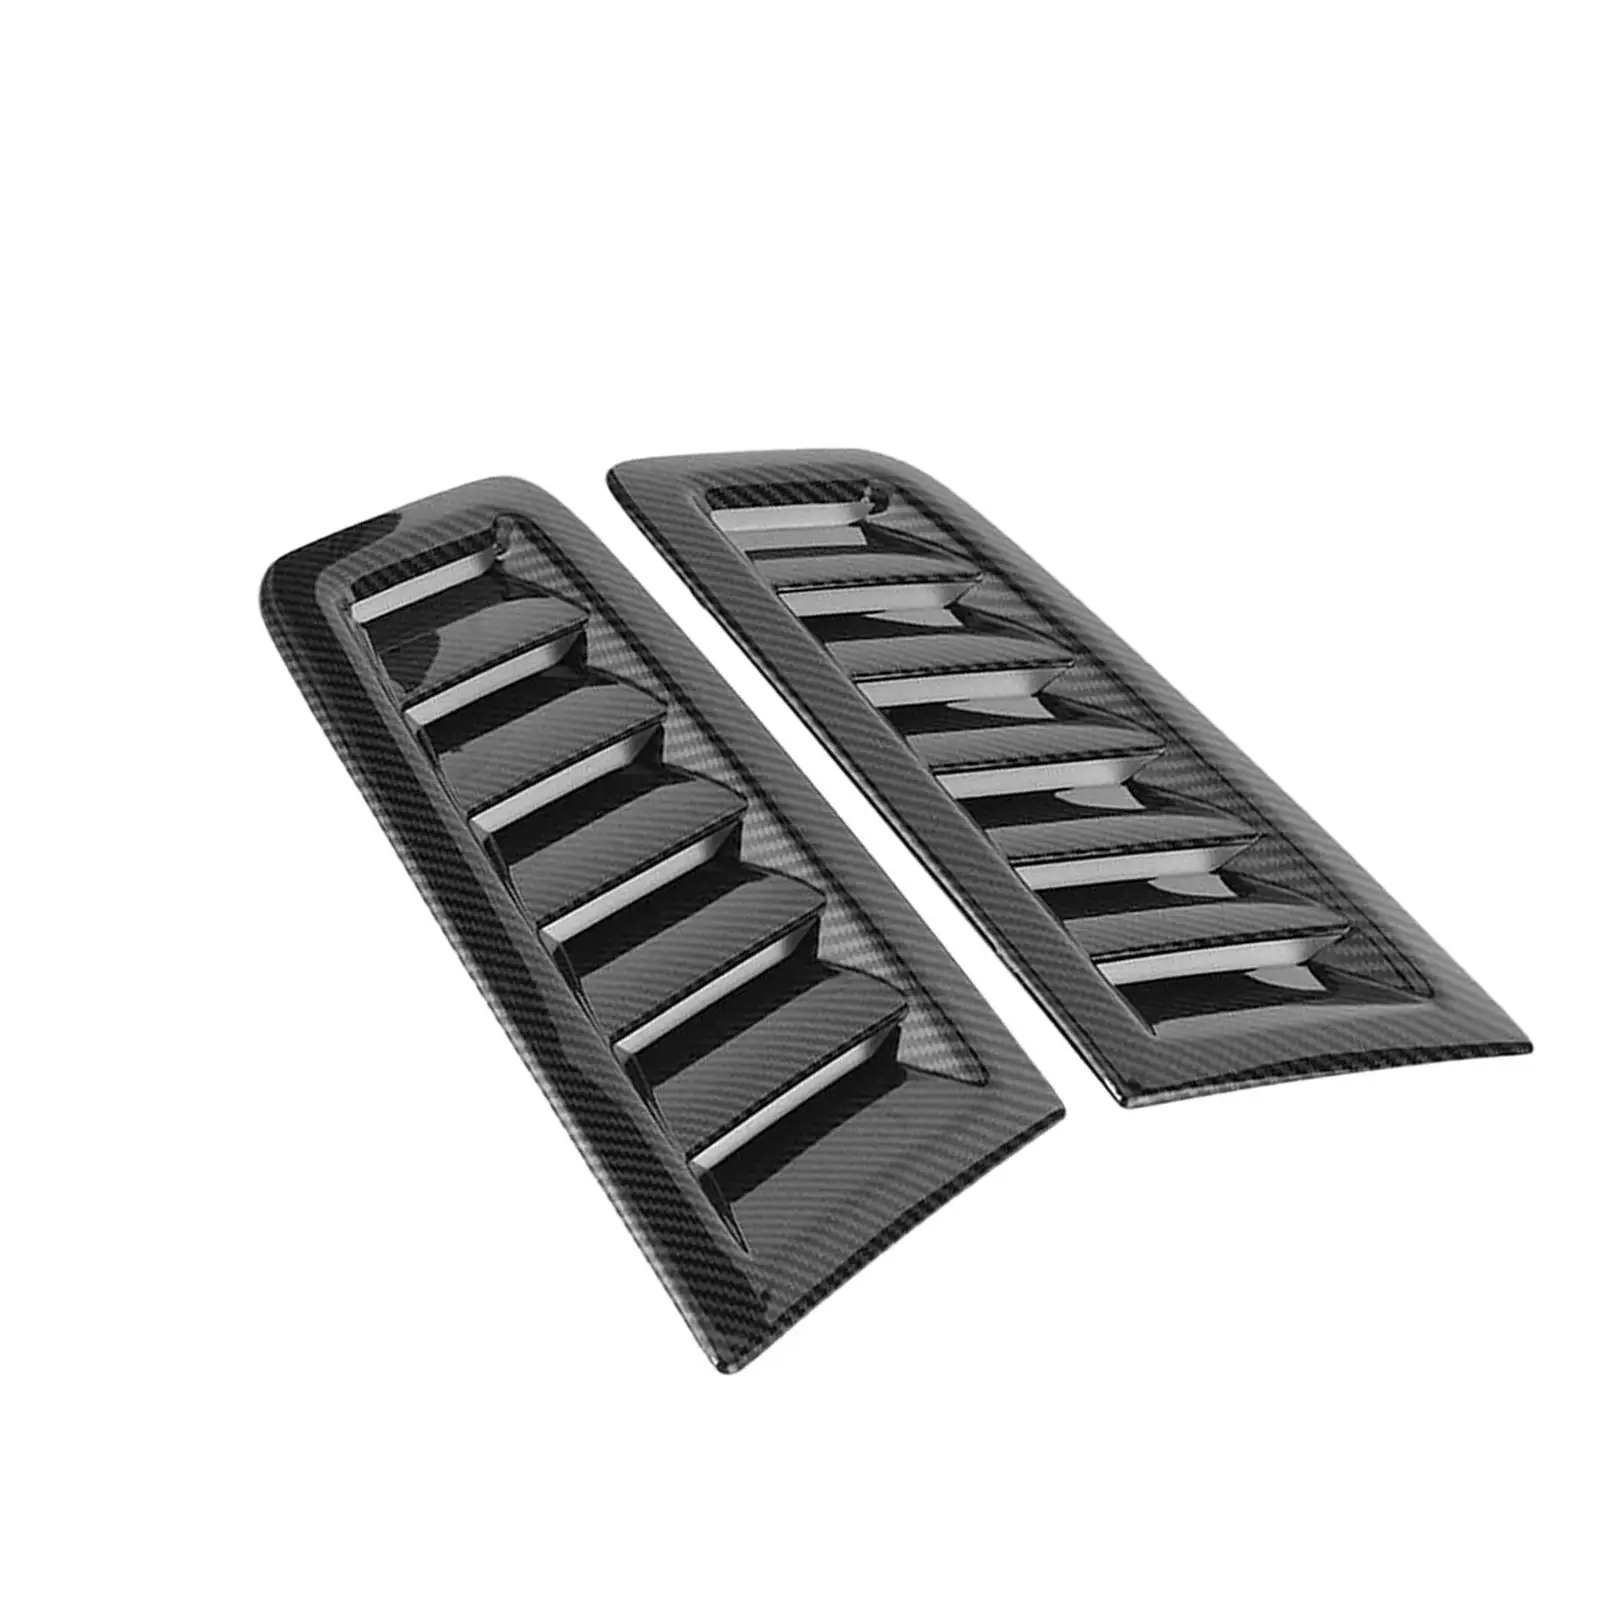 2 Pieces Car Hood Vent Scoops Replacement, Air Intake Hood Vents Bonnet Cover